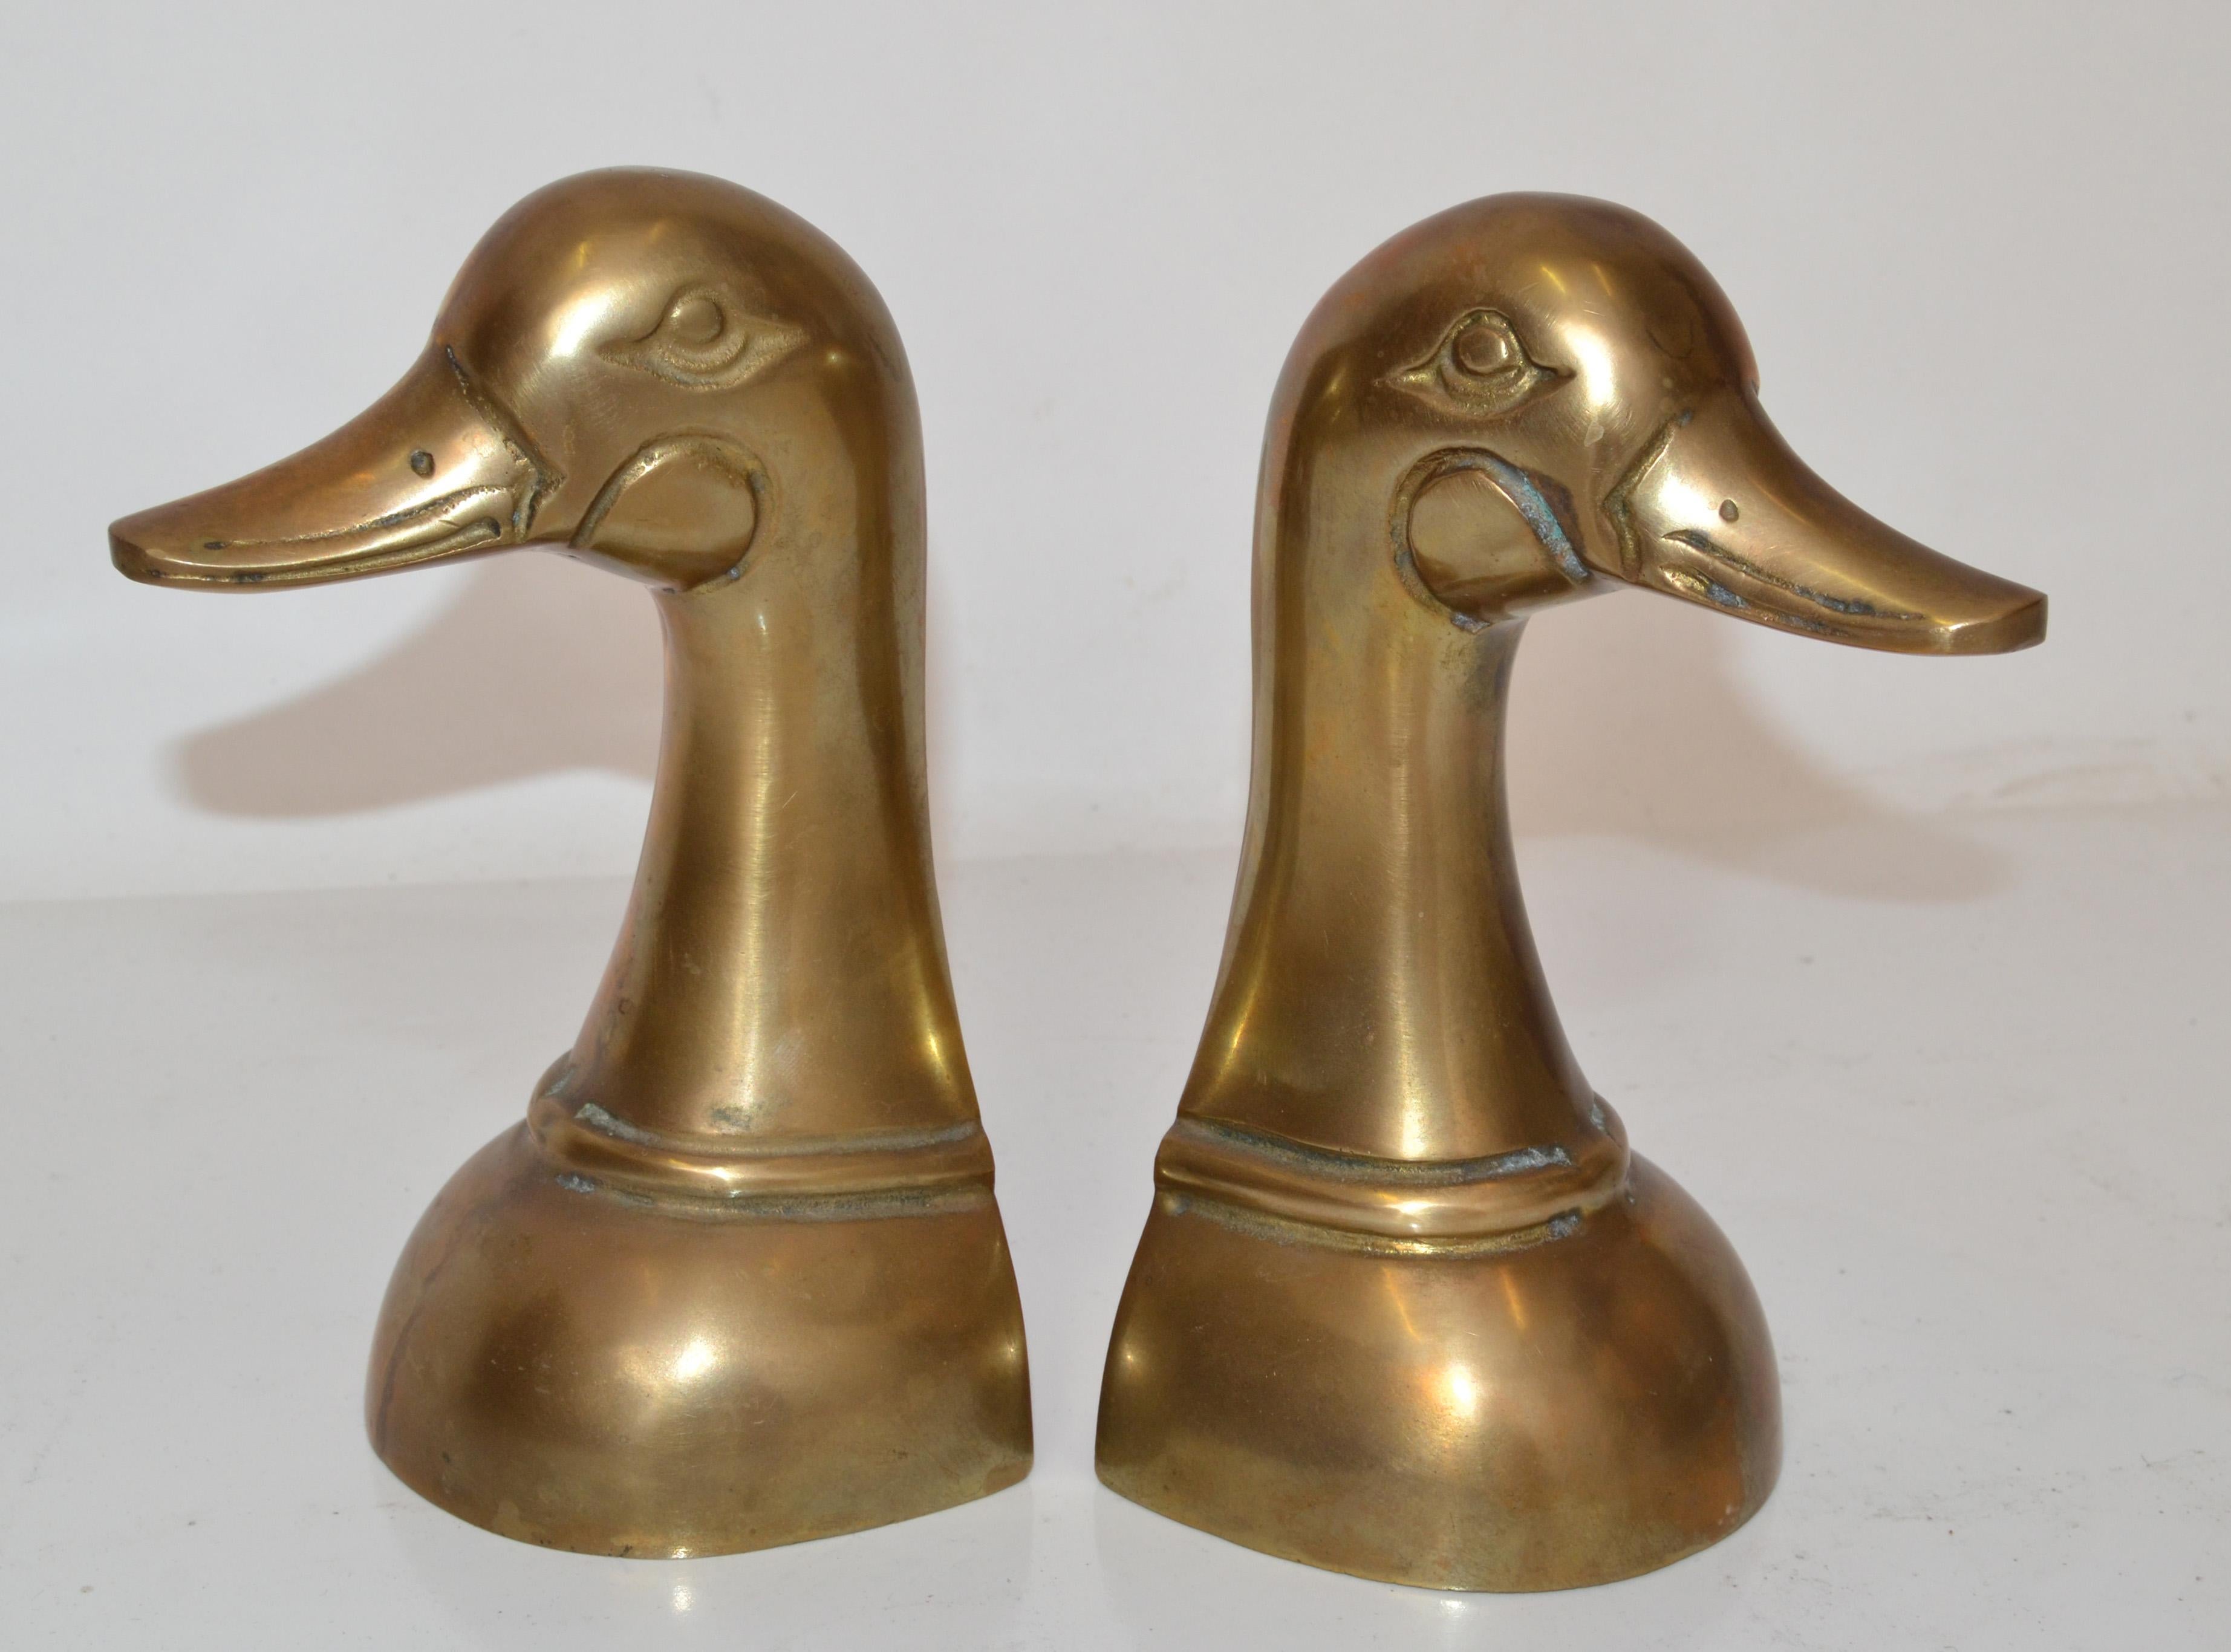 Sarreid attributed Vintage pair of patinated cast brass duck or Mallard Head bookends, Paperweight Home Decor, circa 1950.
Great for holding up books on a bookshelf or as paper weights on a desk or decorative animal sculptures around the